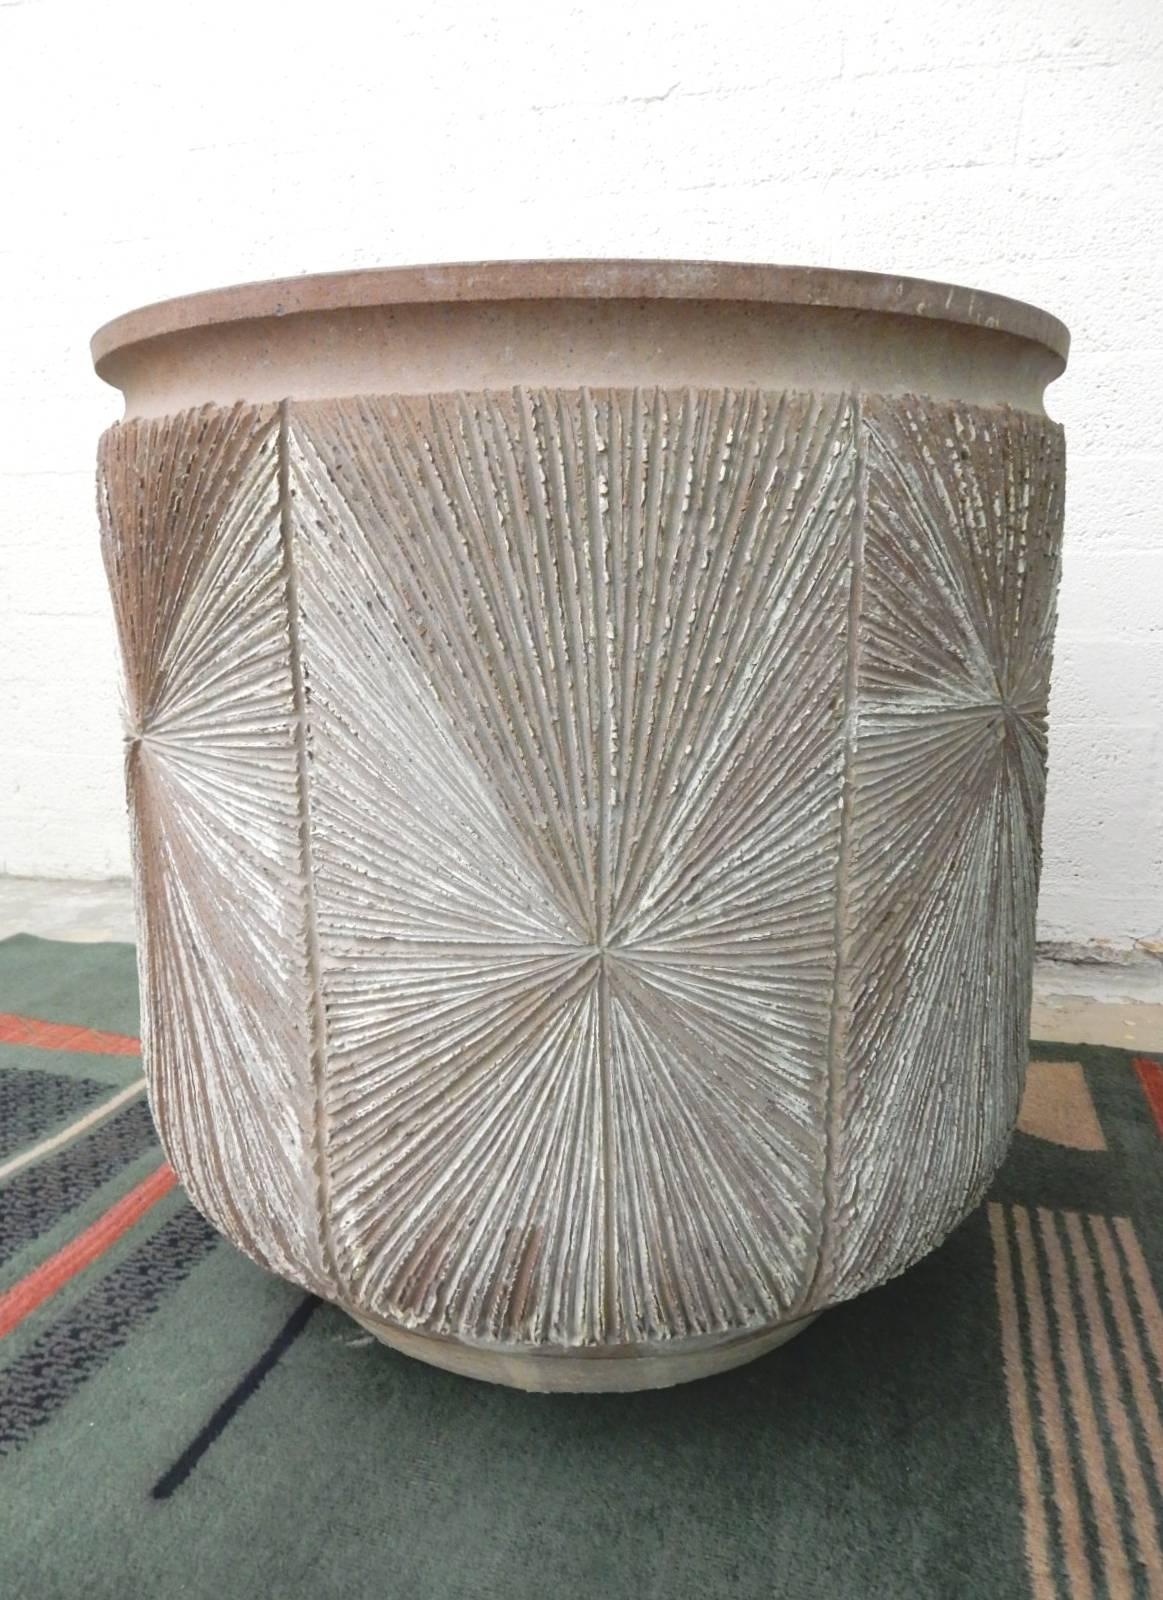 A huge stoneware pot designed by Robert Maxwell and David Cressey for Earthgender Ceramics. ~Starburst~ sgraffito design on all sides.
Two available, each 25 inch tall and 24 inch wide weighing in at approximately 85 lbs.